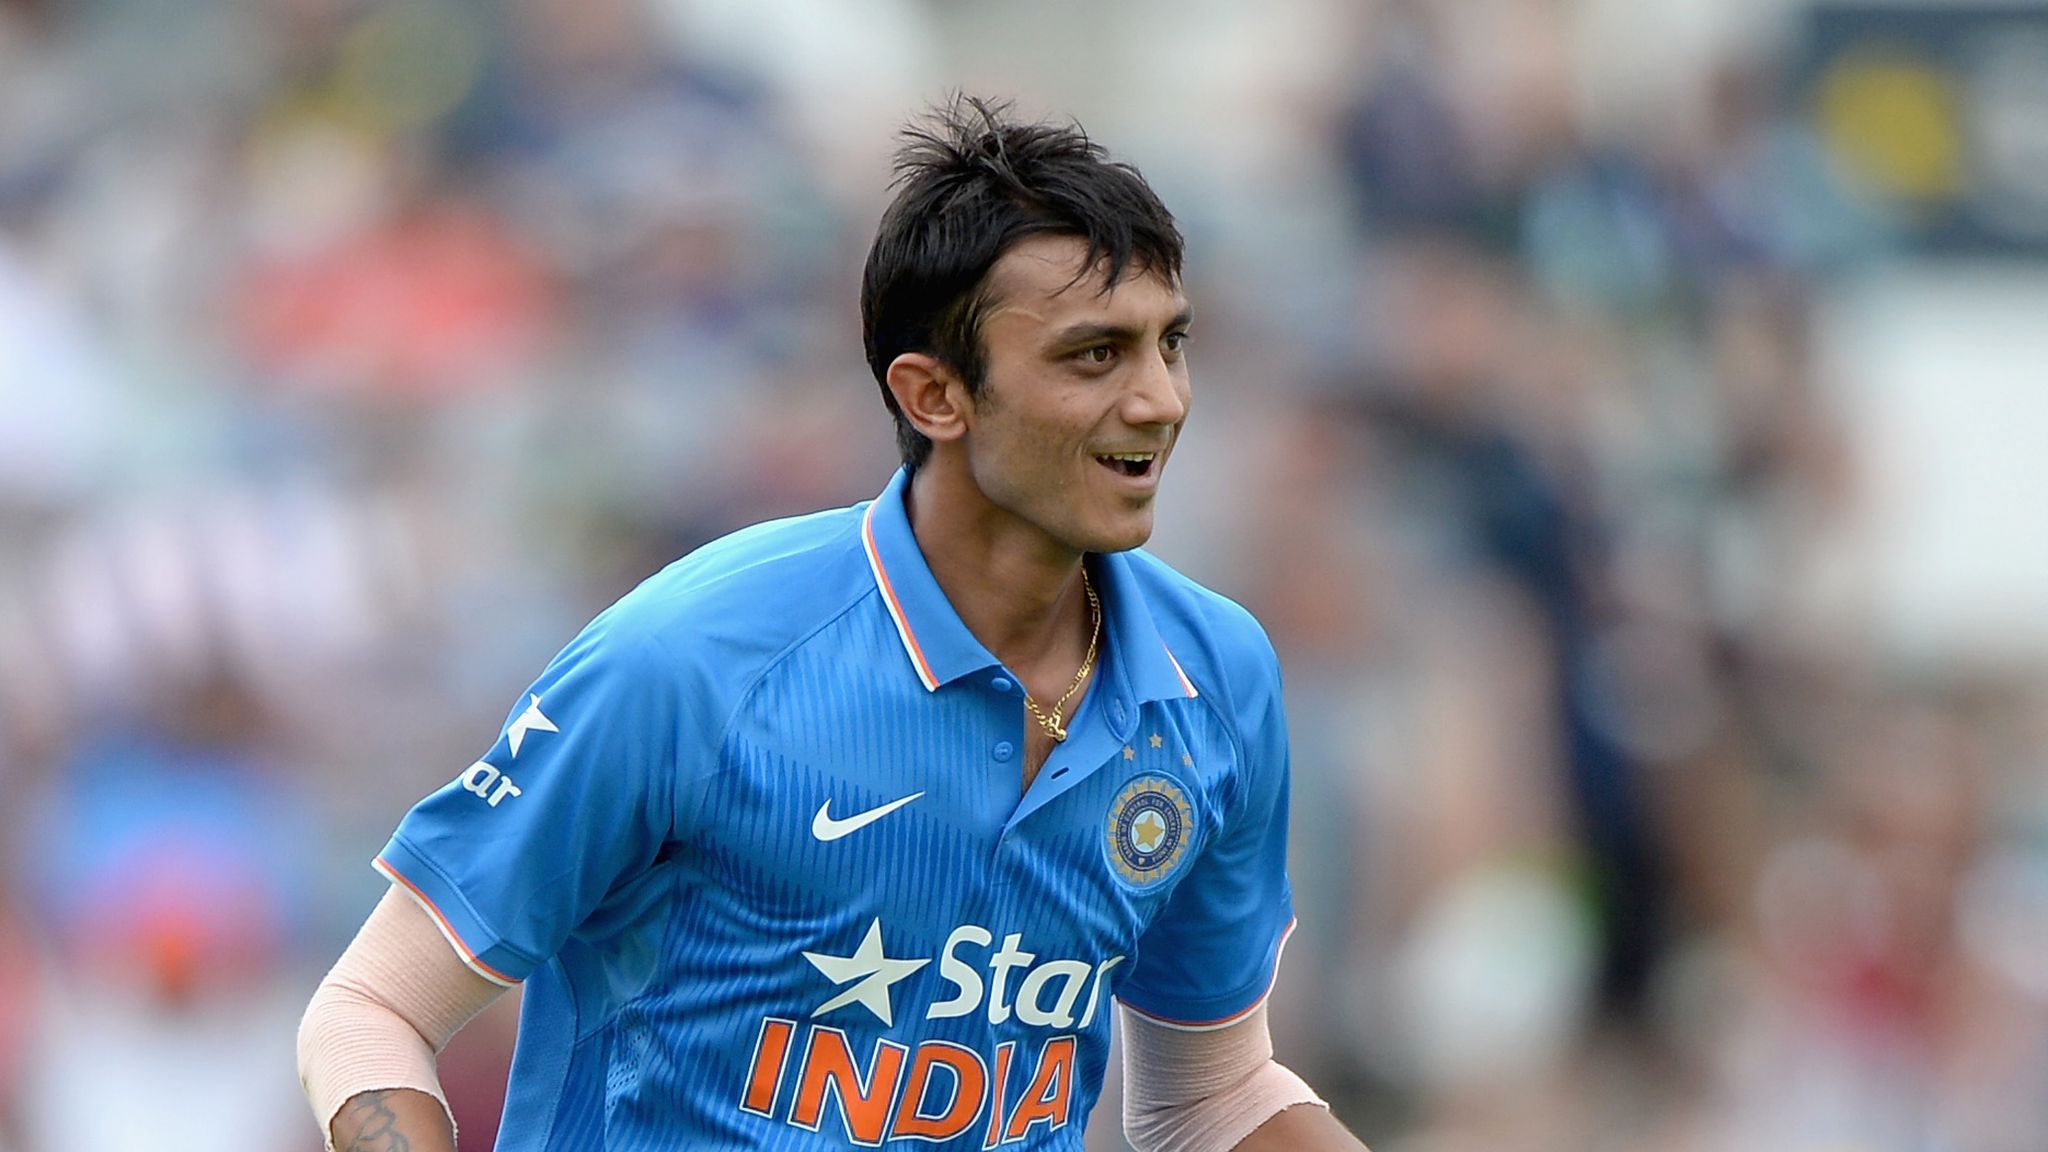 India All Rounder Axar Patel To Join Durham